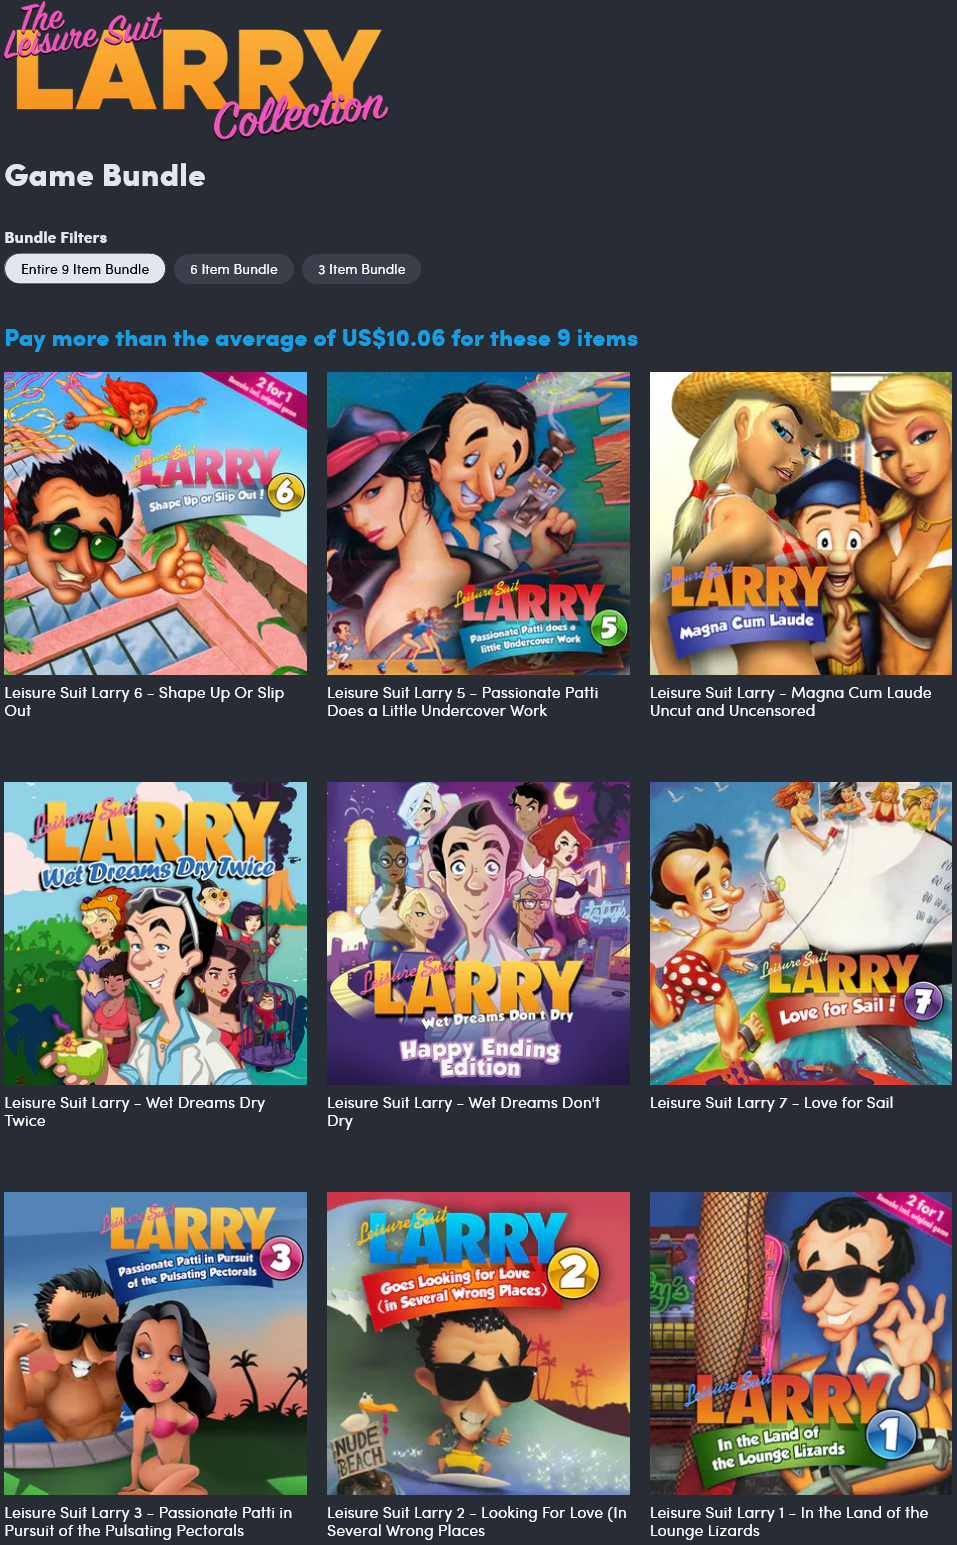 Screenshot 2021-11-11 at 10-46-12 Leisure Suit Larry Collection Bundle.png